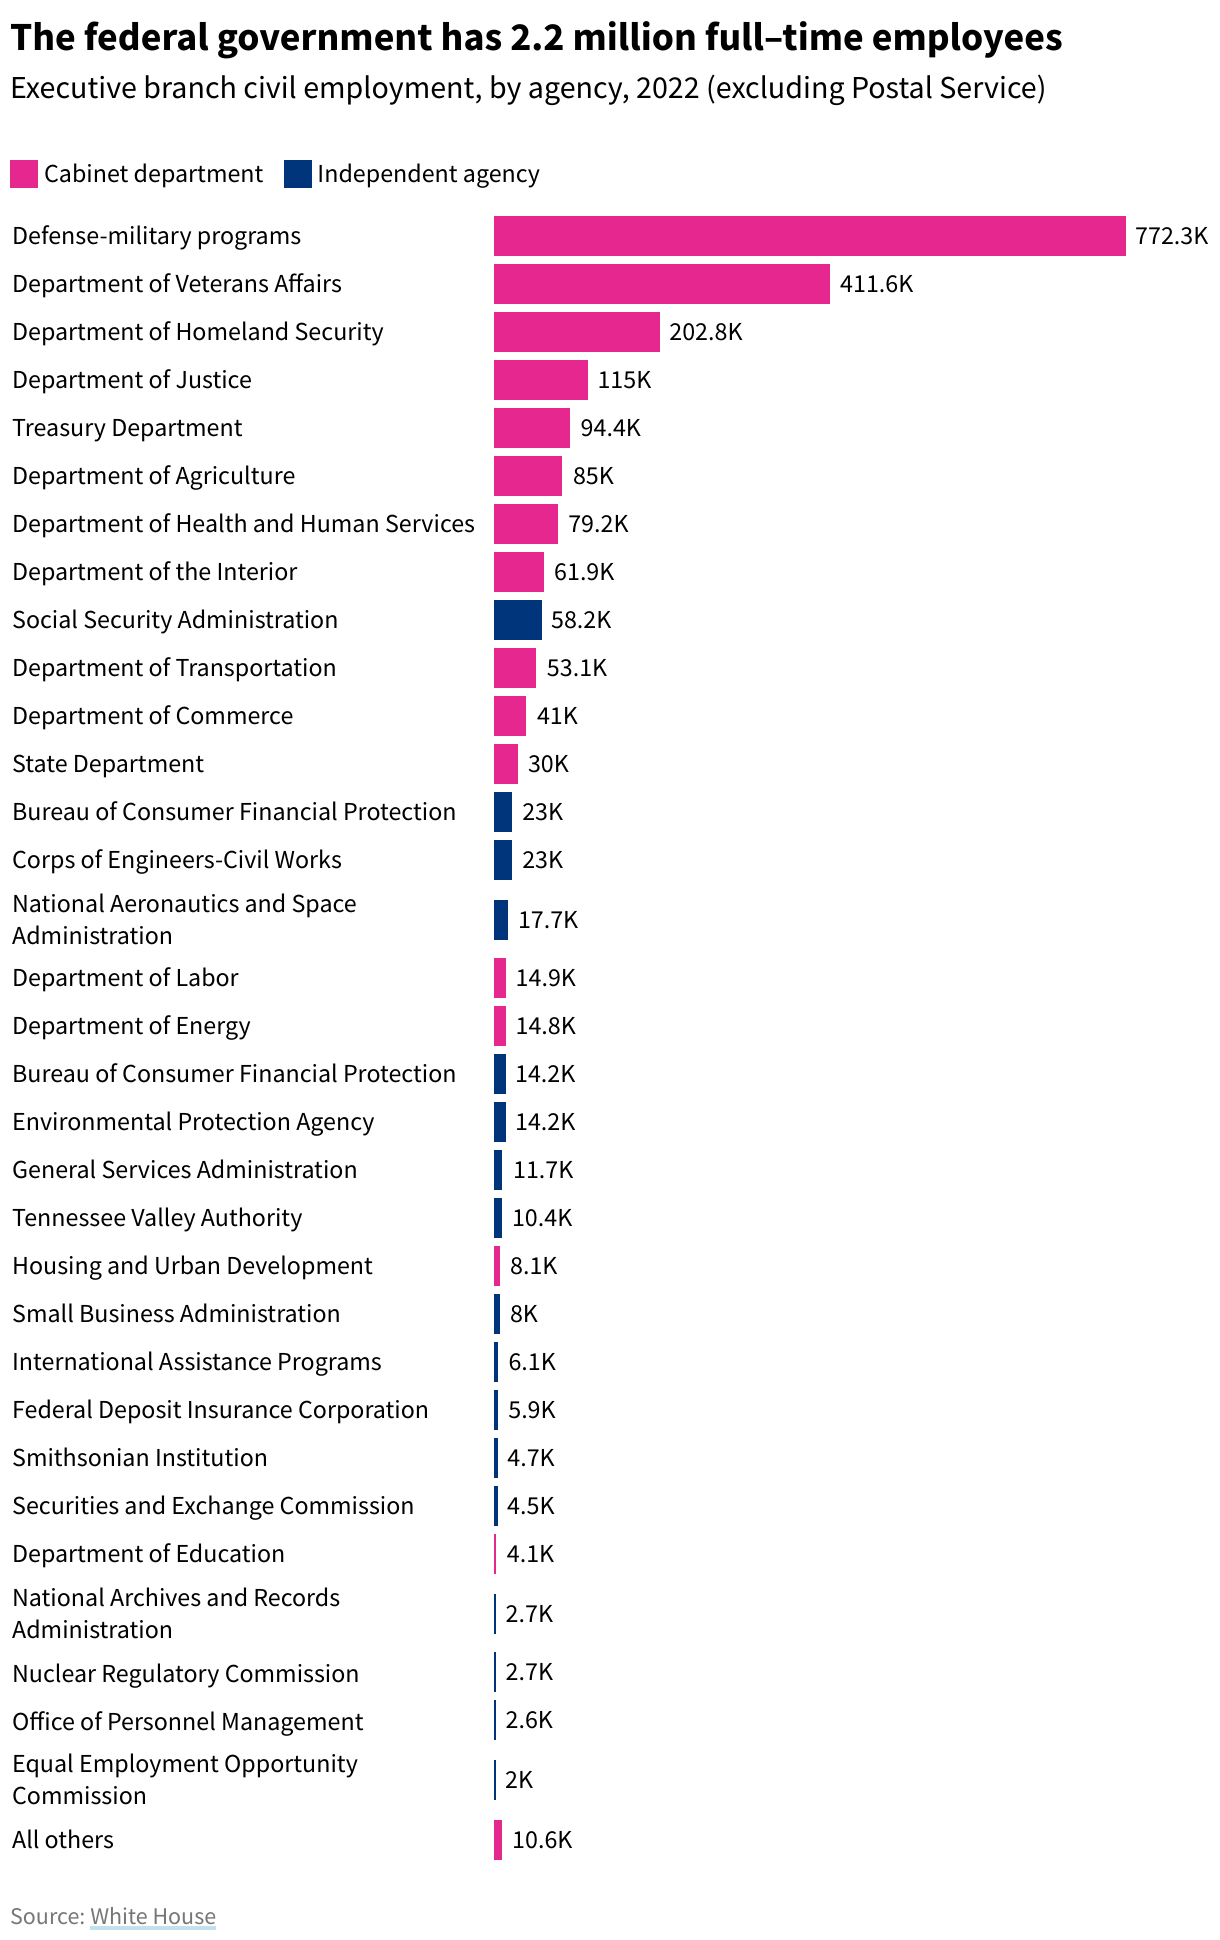 Bar chart showing the number of federal civilian employees by branch. The top 3 are defense-military programs, Veterans Affairs, and Homeland Security.